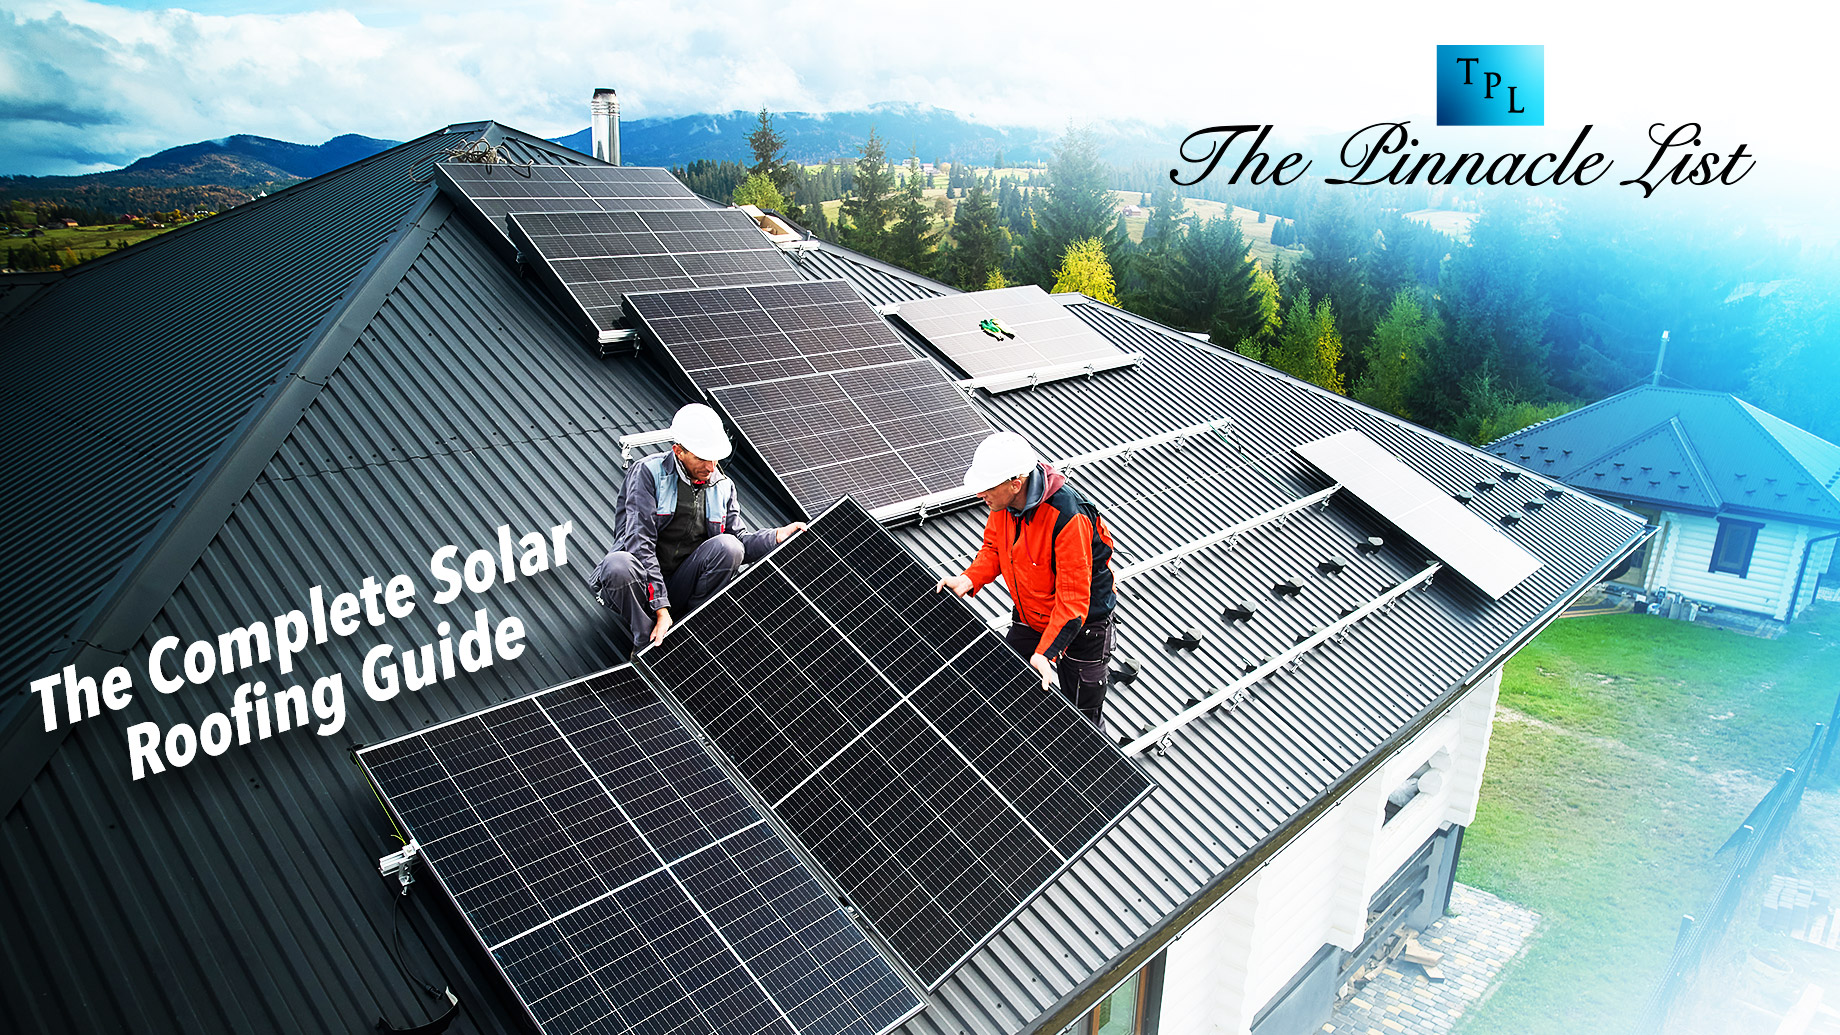 The Complete Solar Roofing Guide